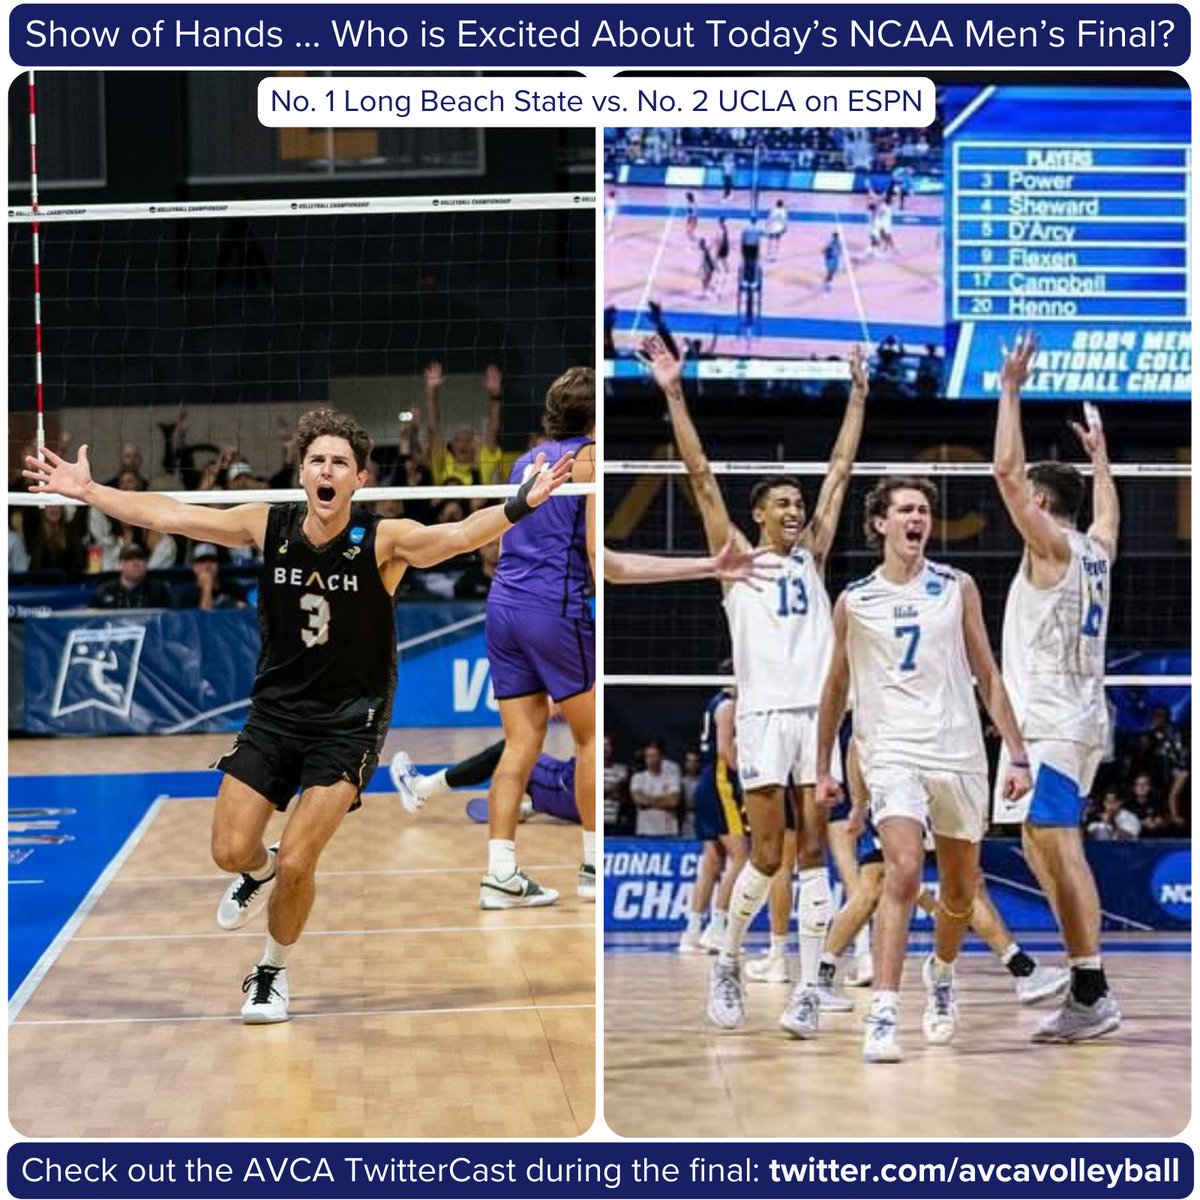 Time for more excitement and greatness at the Men’s Volleyball Championship! No. 2 @UCLAMVB faces No. 1 @LBSUMVB at 5pm (ET) for all the marbles. Check out the match on ESPN, and follow the AVCA TwitterCast right here for deep-dive statistical analysis. #WeAreAVCA #NCAAMVB